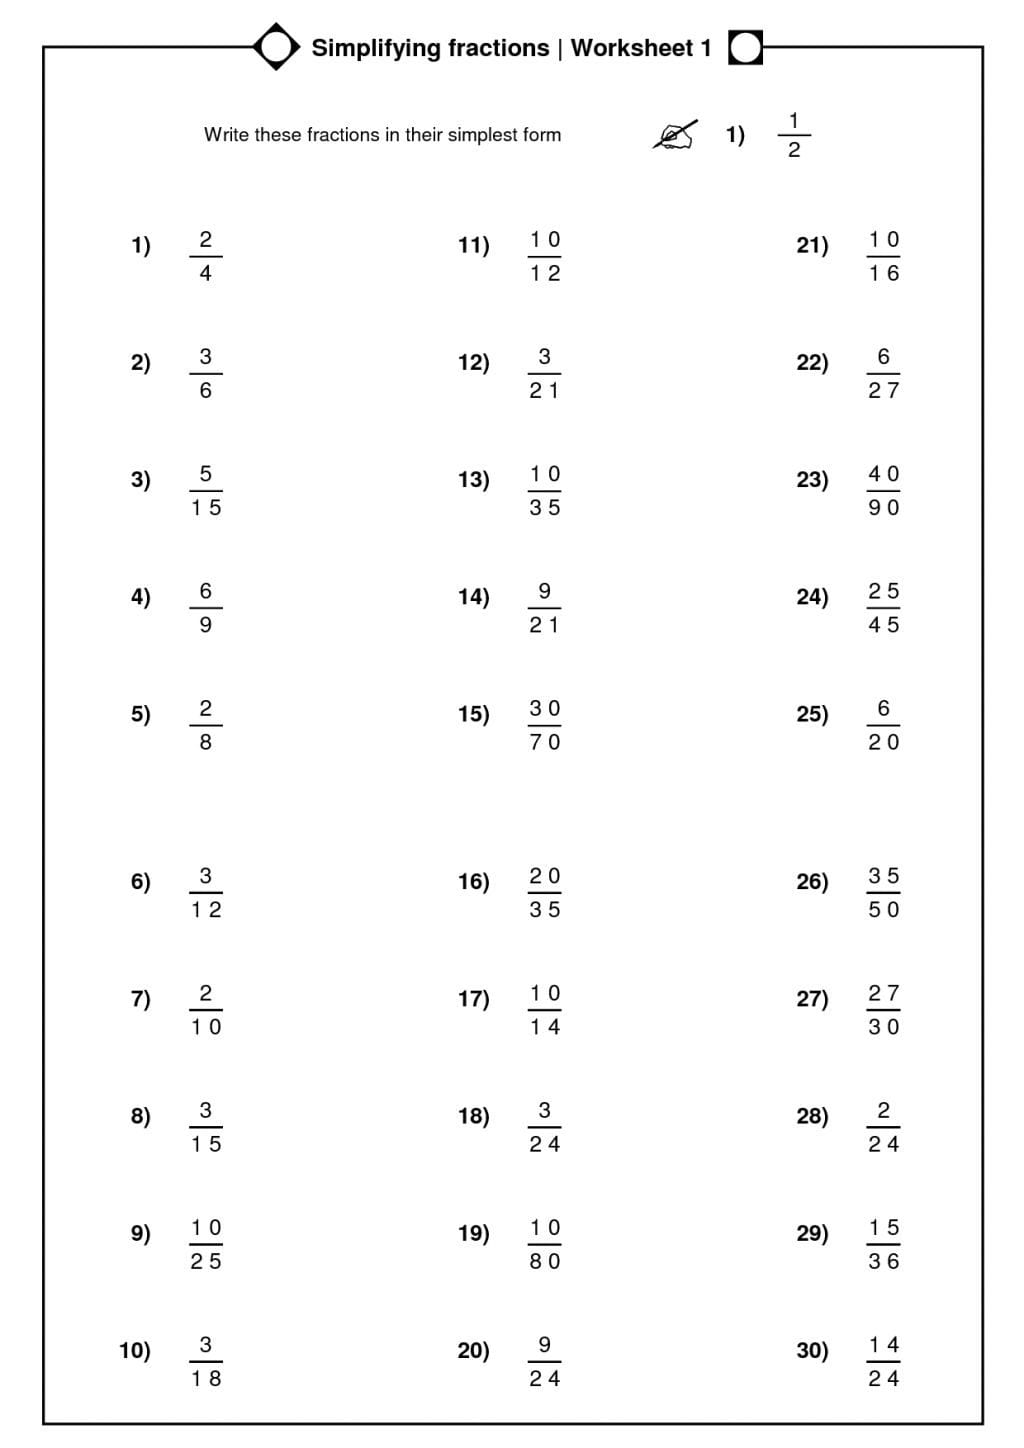 Simplifying Fractions Worksheet With Answers  Briefencounters With Regard To Simplifying Fractions Worksheet With Answers